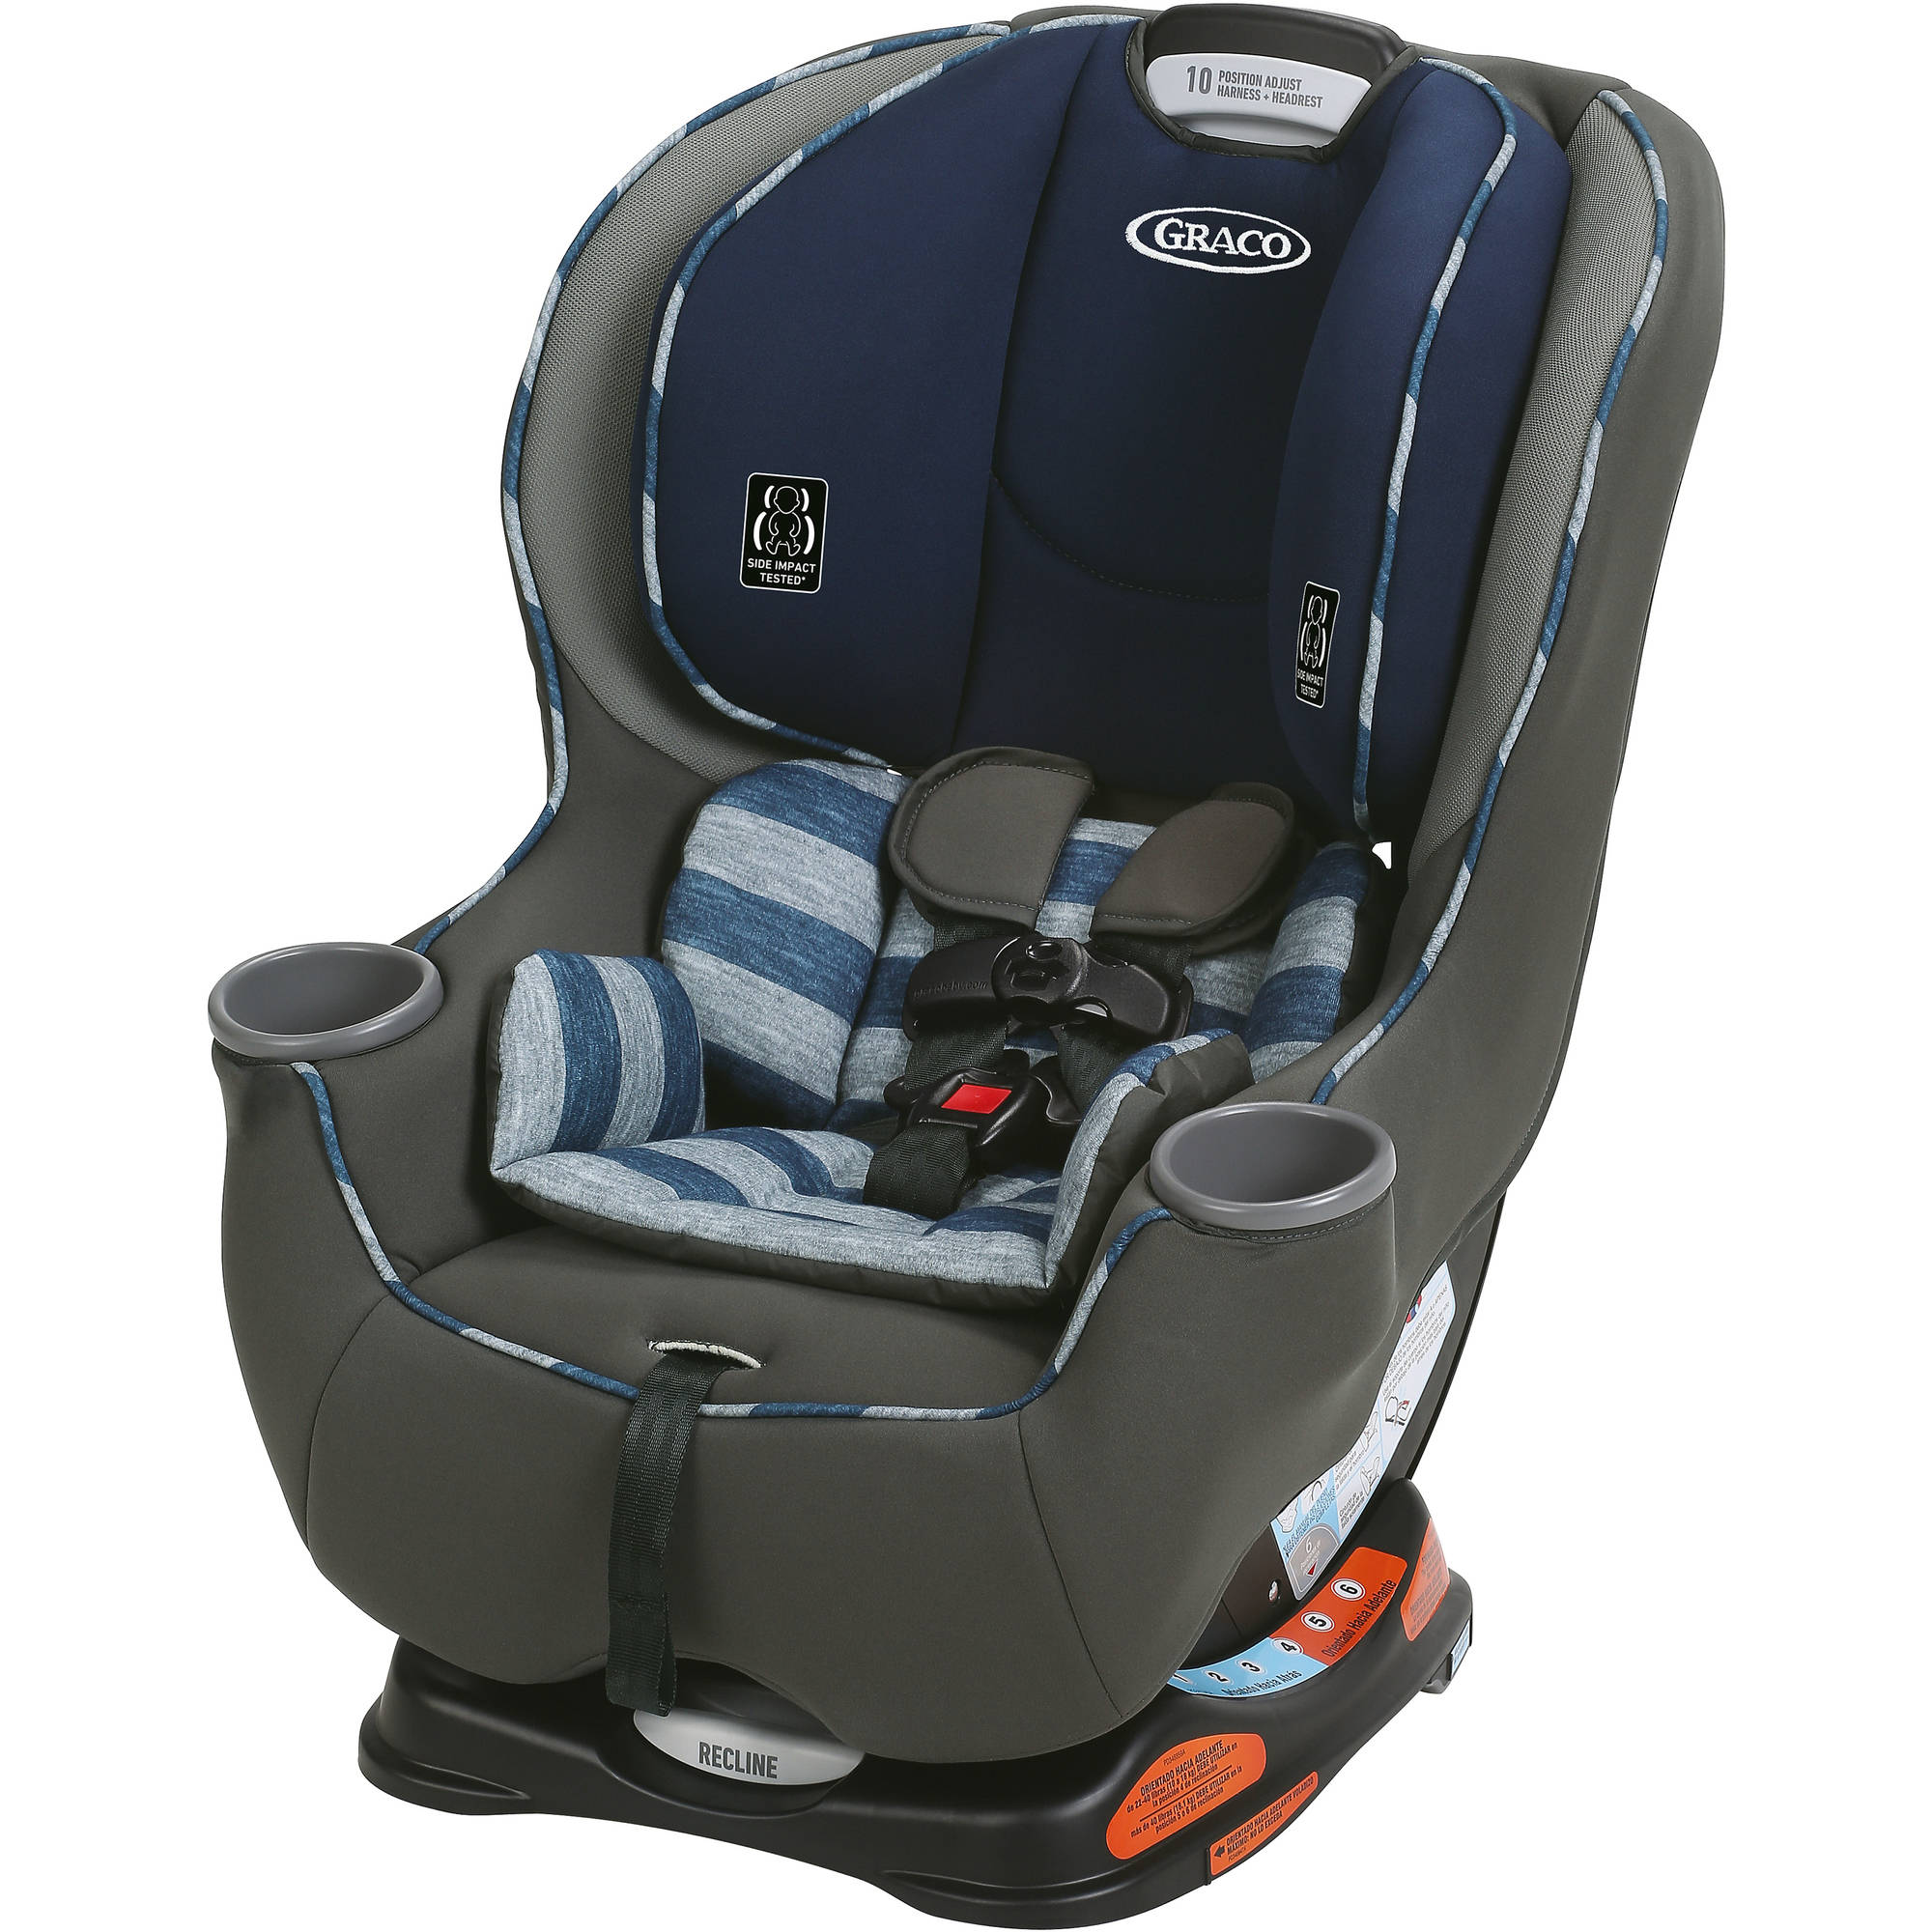 Graco Sequel 65 Convertible Car Seat with 6-Position Recline, Caden Navy - image 1 of 7